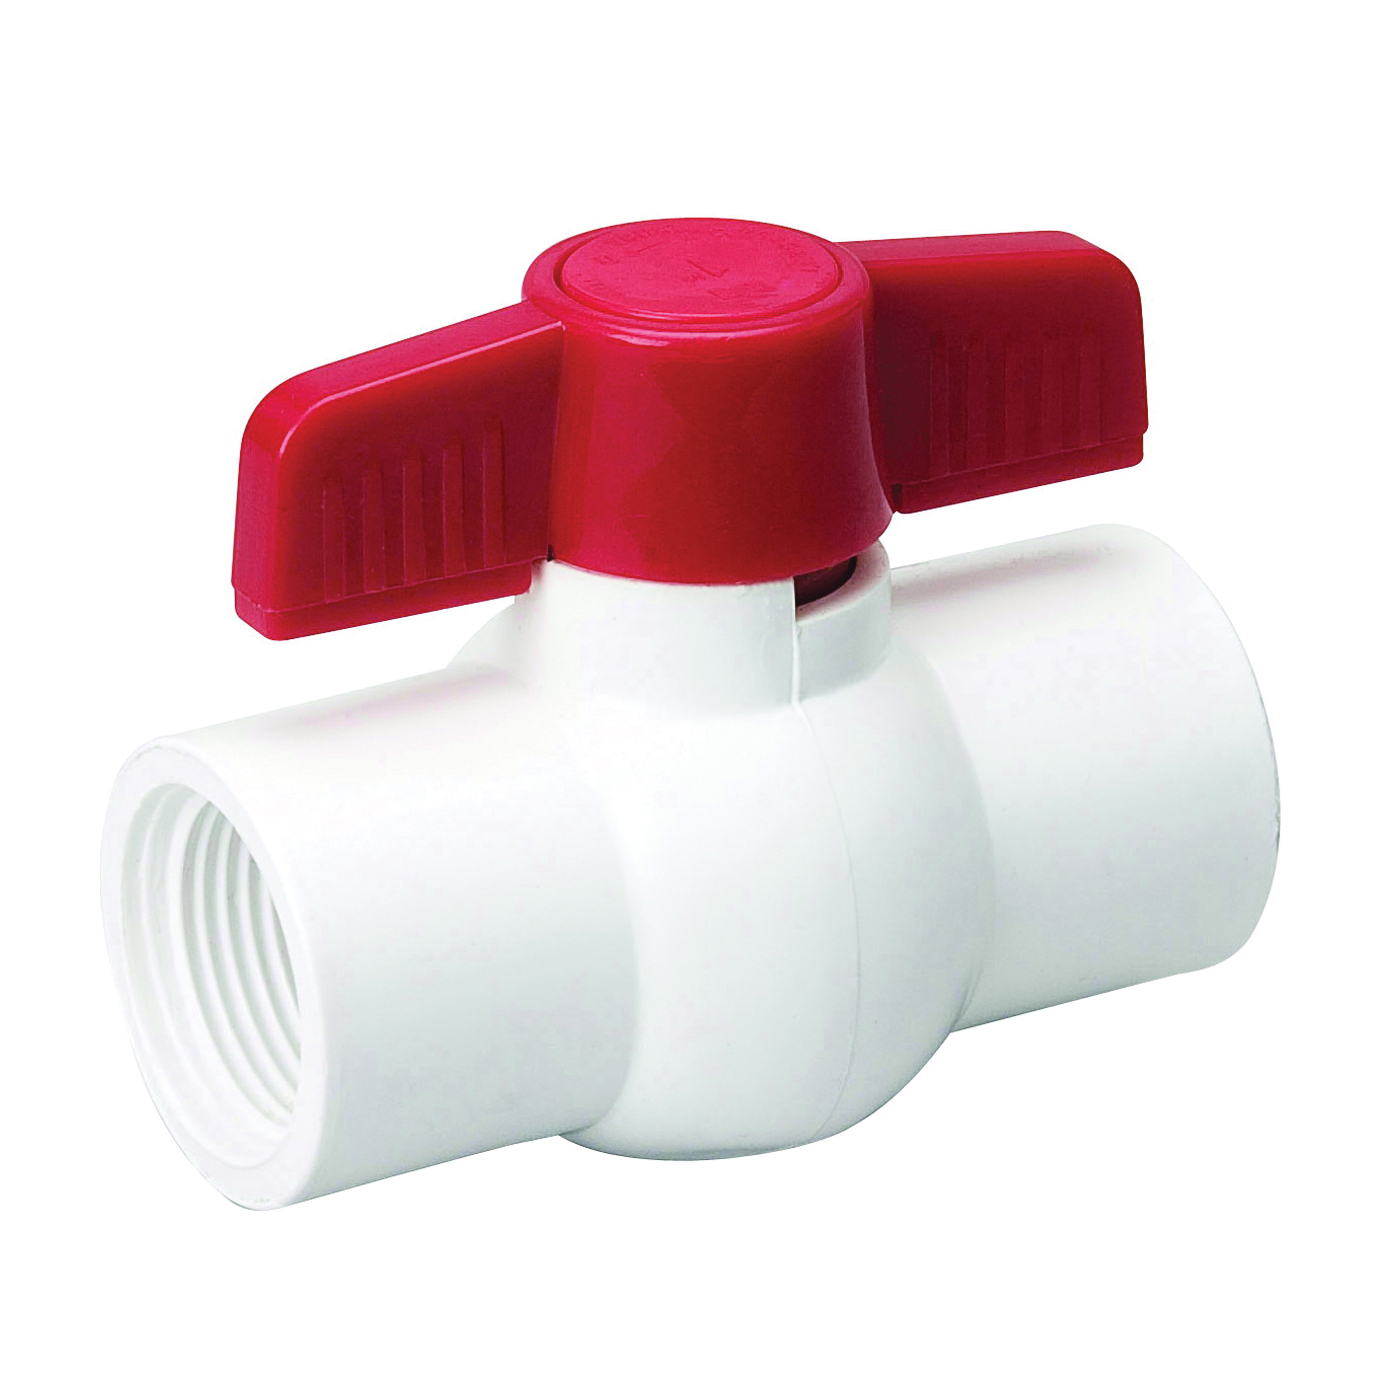 B & K 107-138HC Ball Valve, 2 in Connection, FPT x FPT, 150 psi Pressure, PVC Body